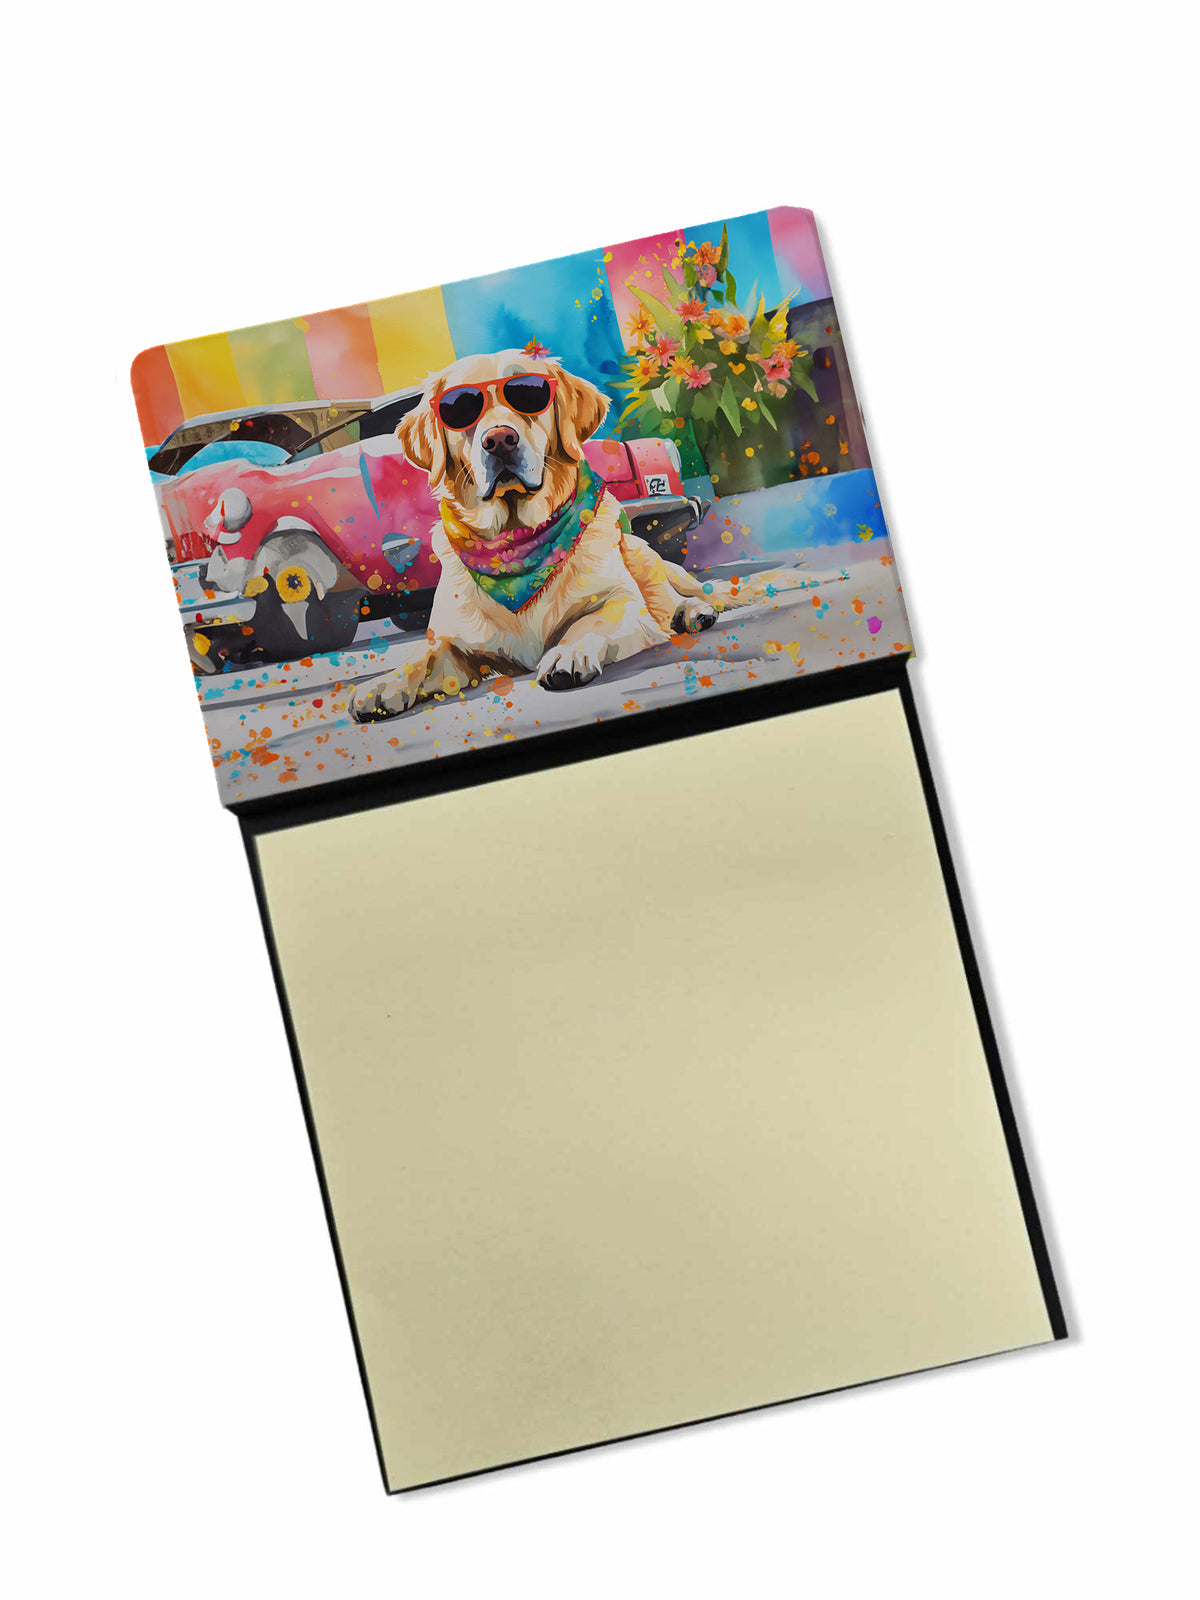 Buy this Yellow Labrador Hippie Dawg Sticky Note Holder